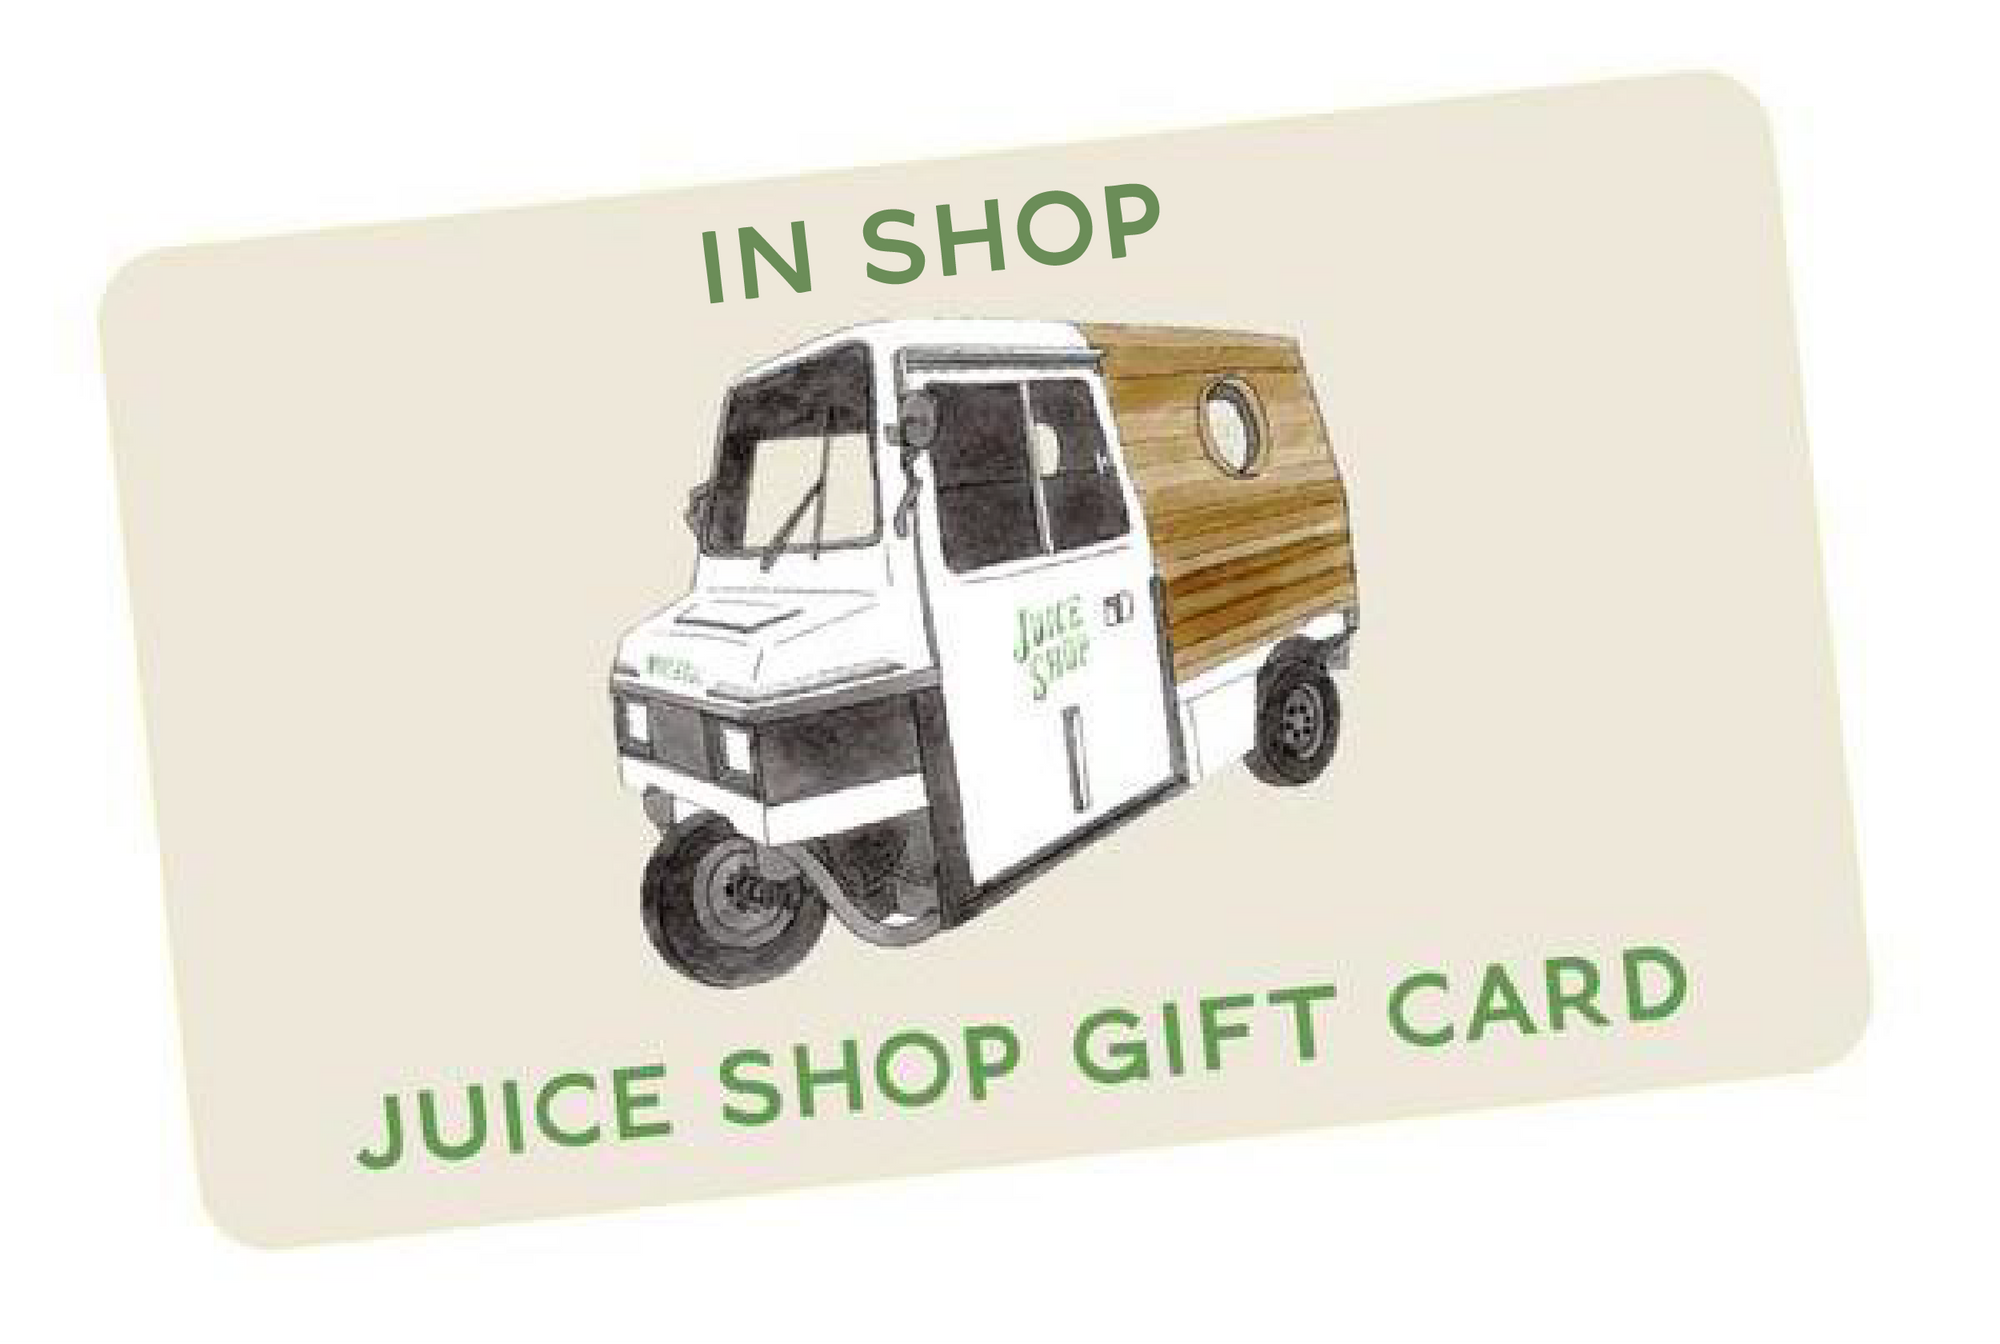 The Shop Gift Card